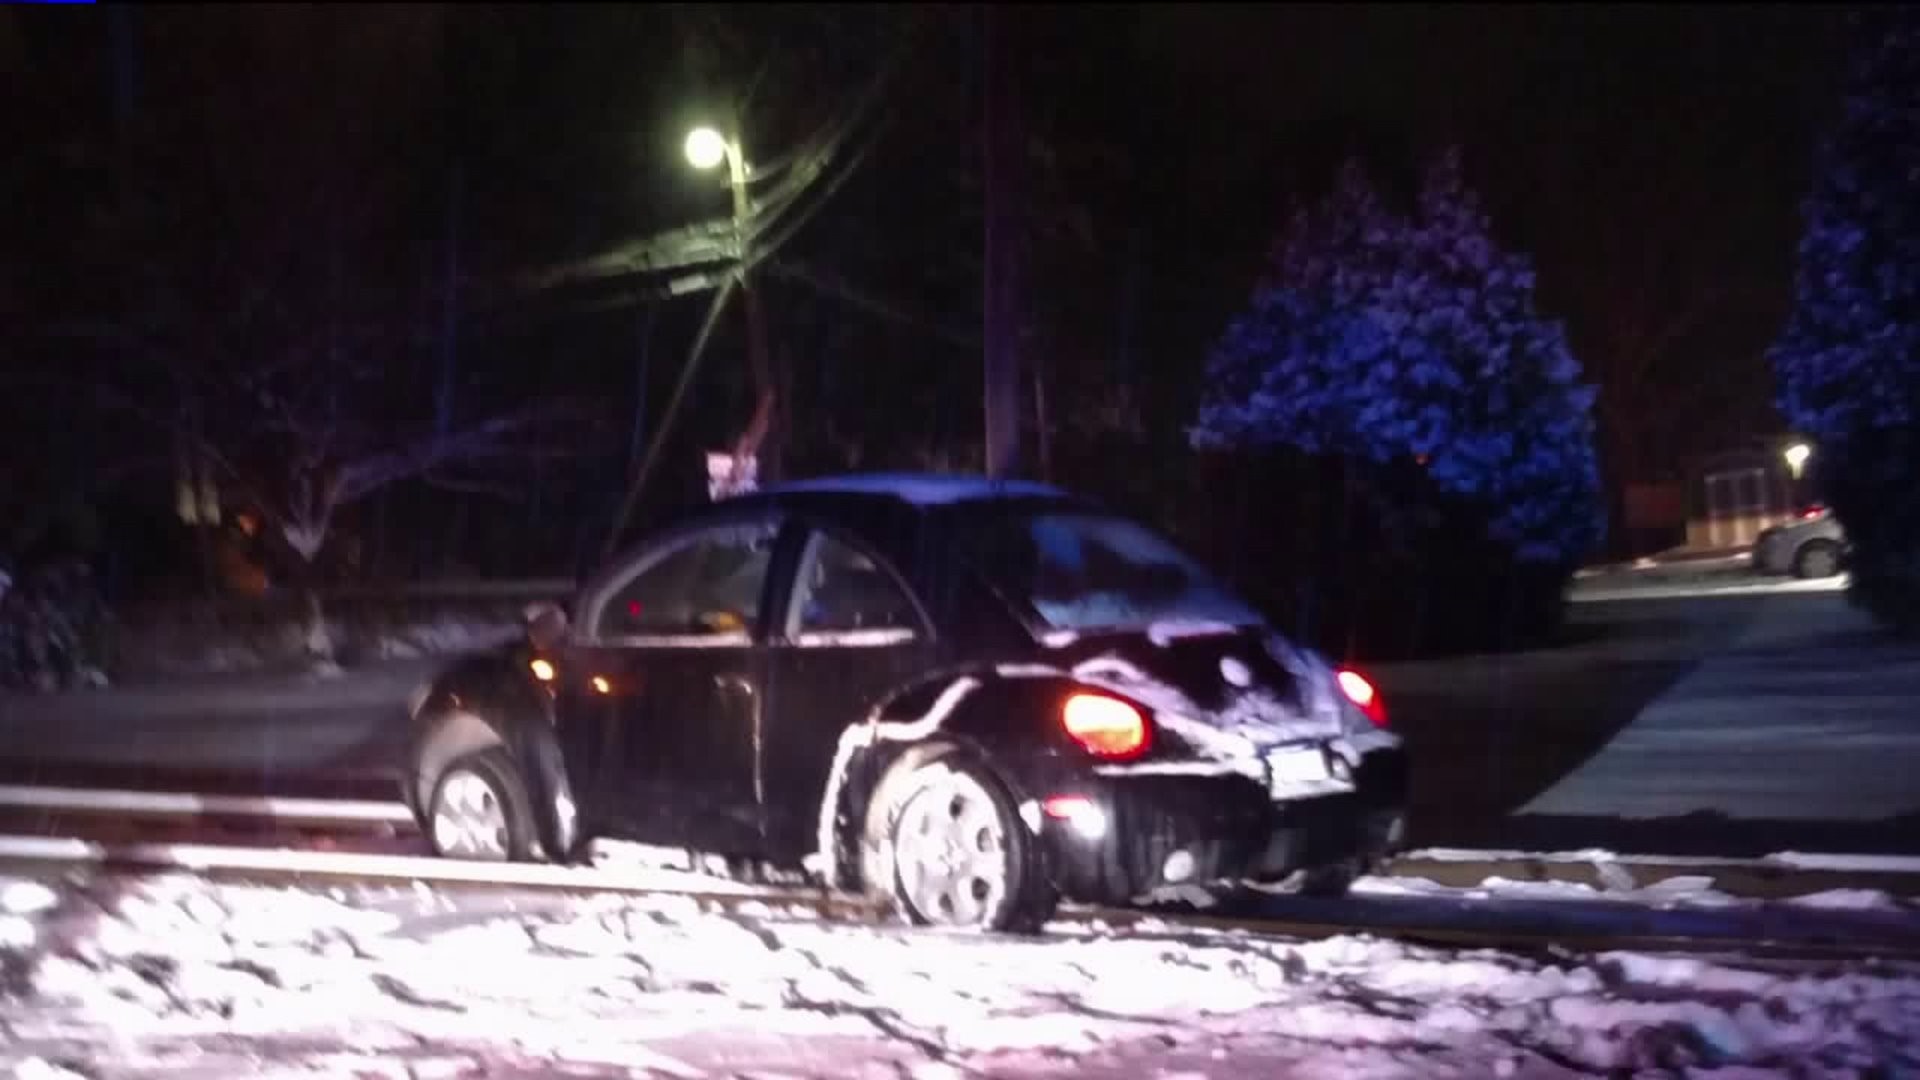 Car Stuck on Railroad Tracks, Towed to Avoid Collision